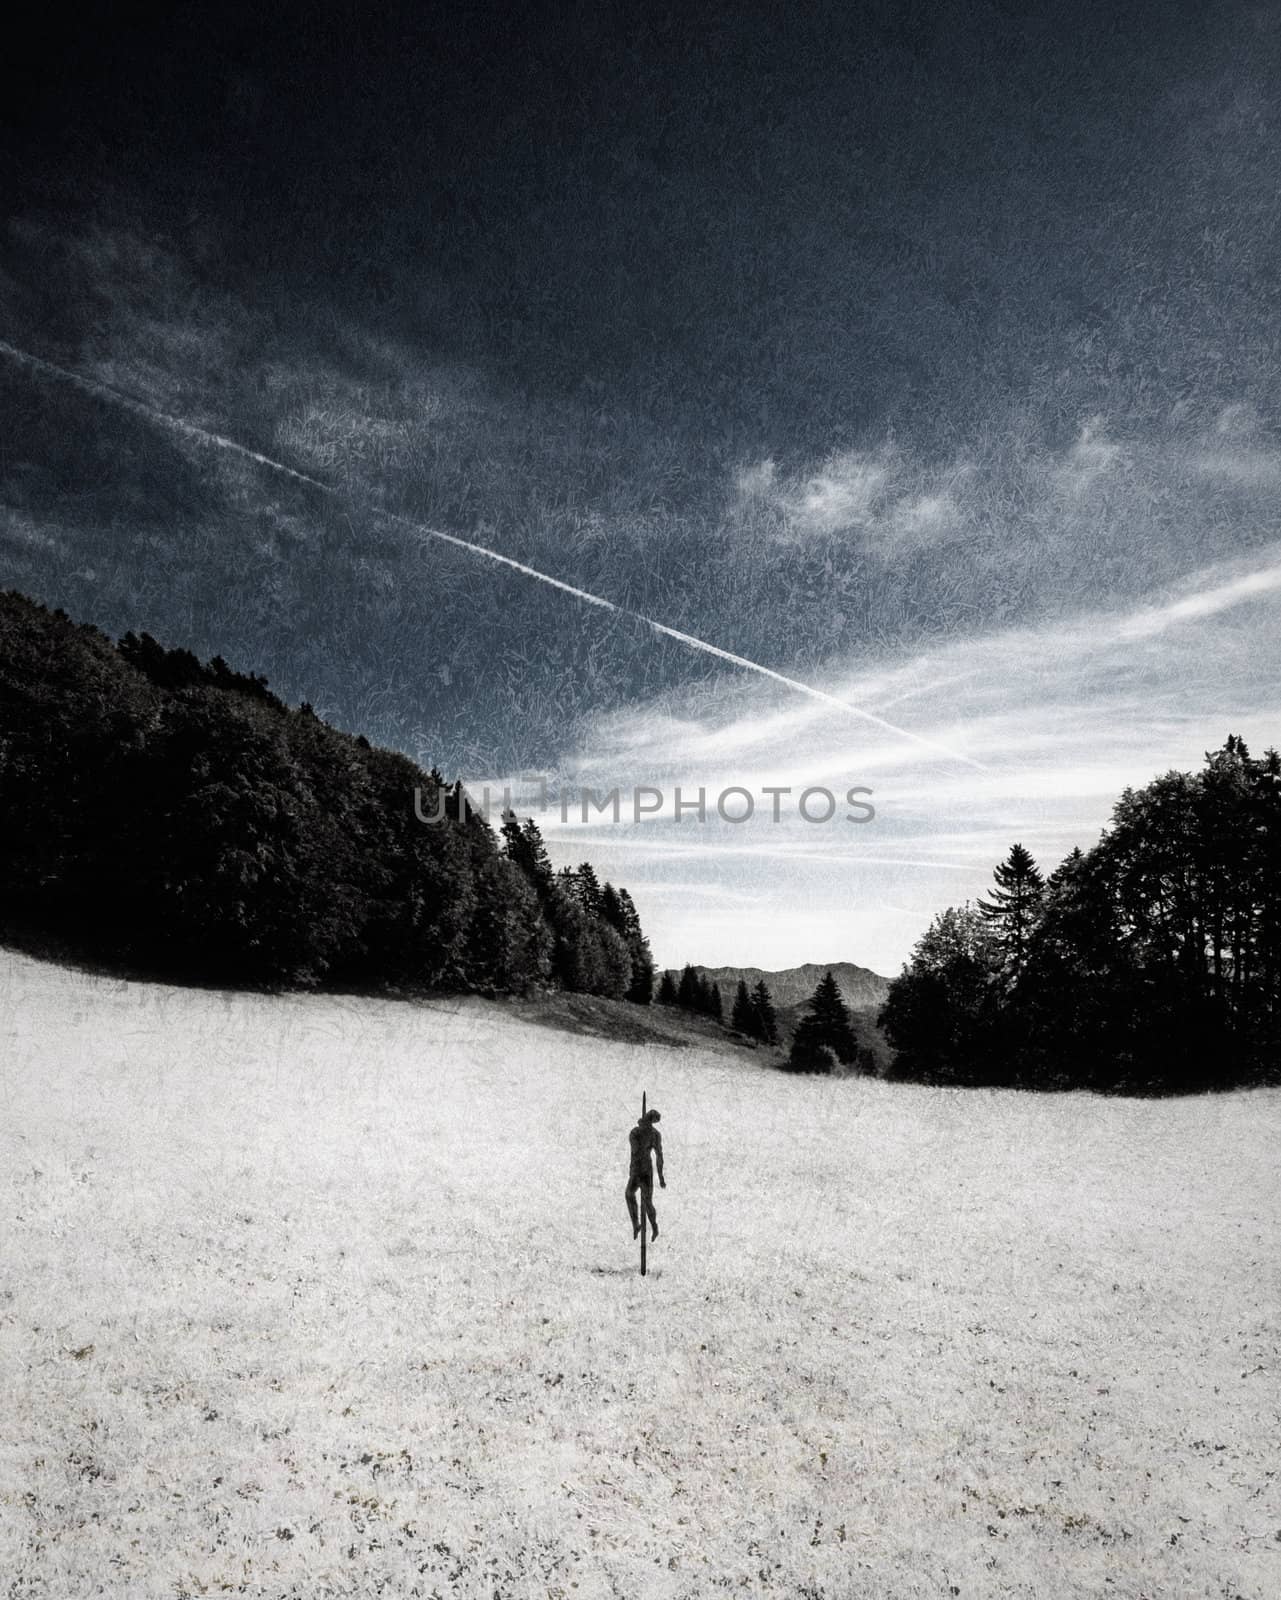 Concept digital art for a book cover with an impaled man in the middle of nowhere